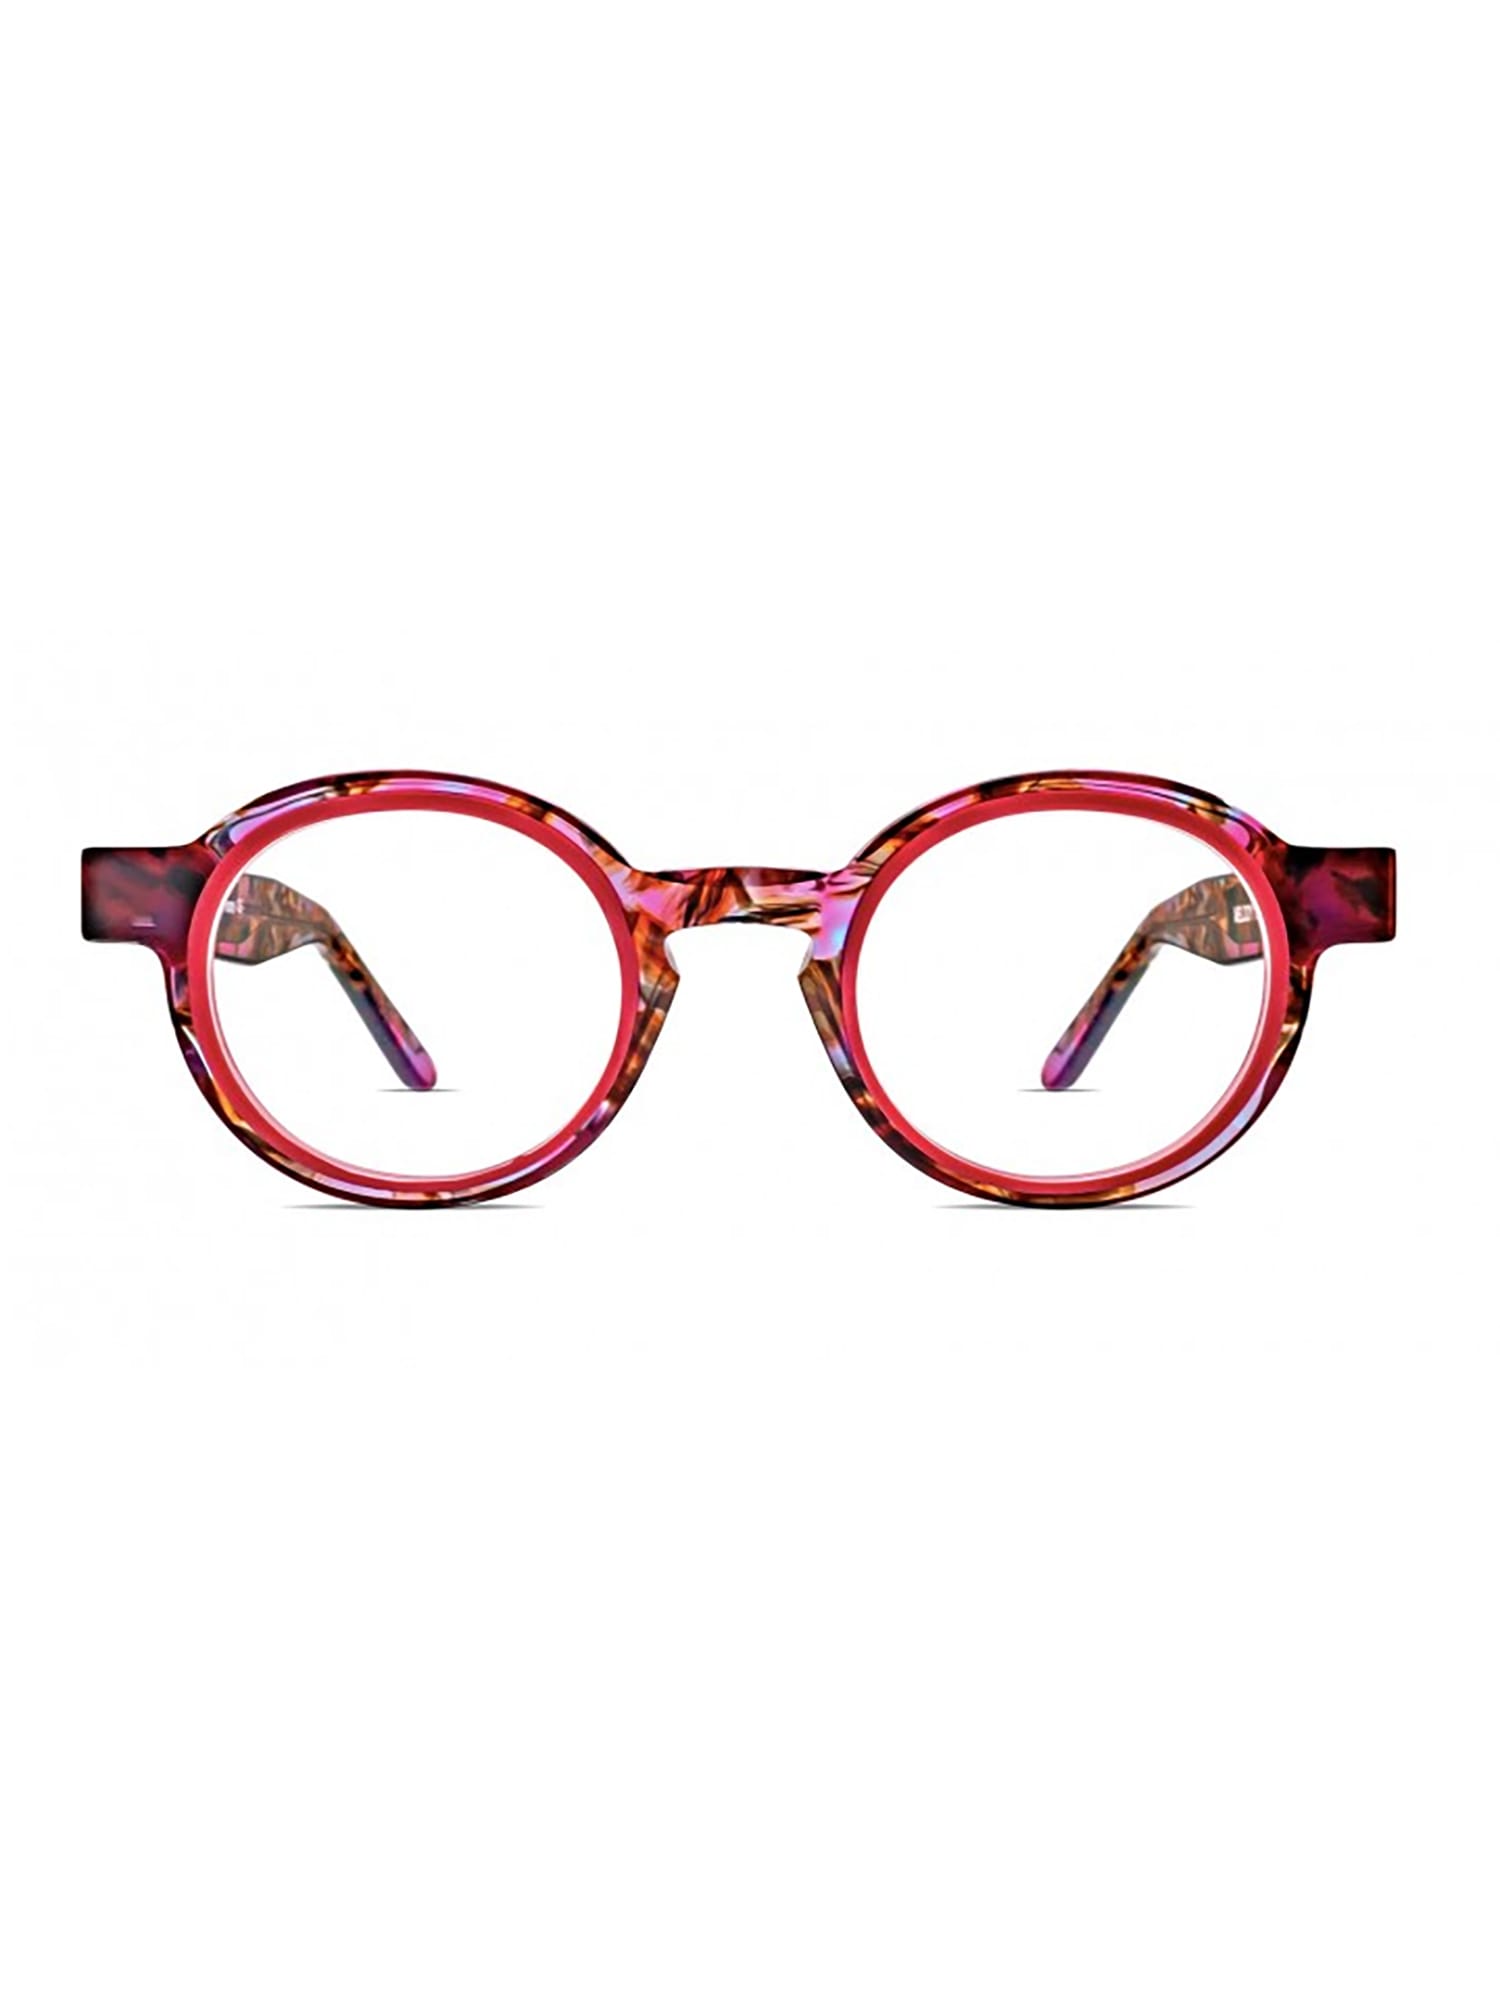 Thierry Lasry Melody Eyewear In Red